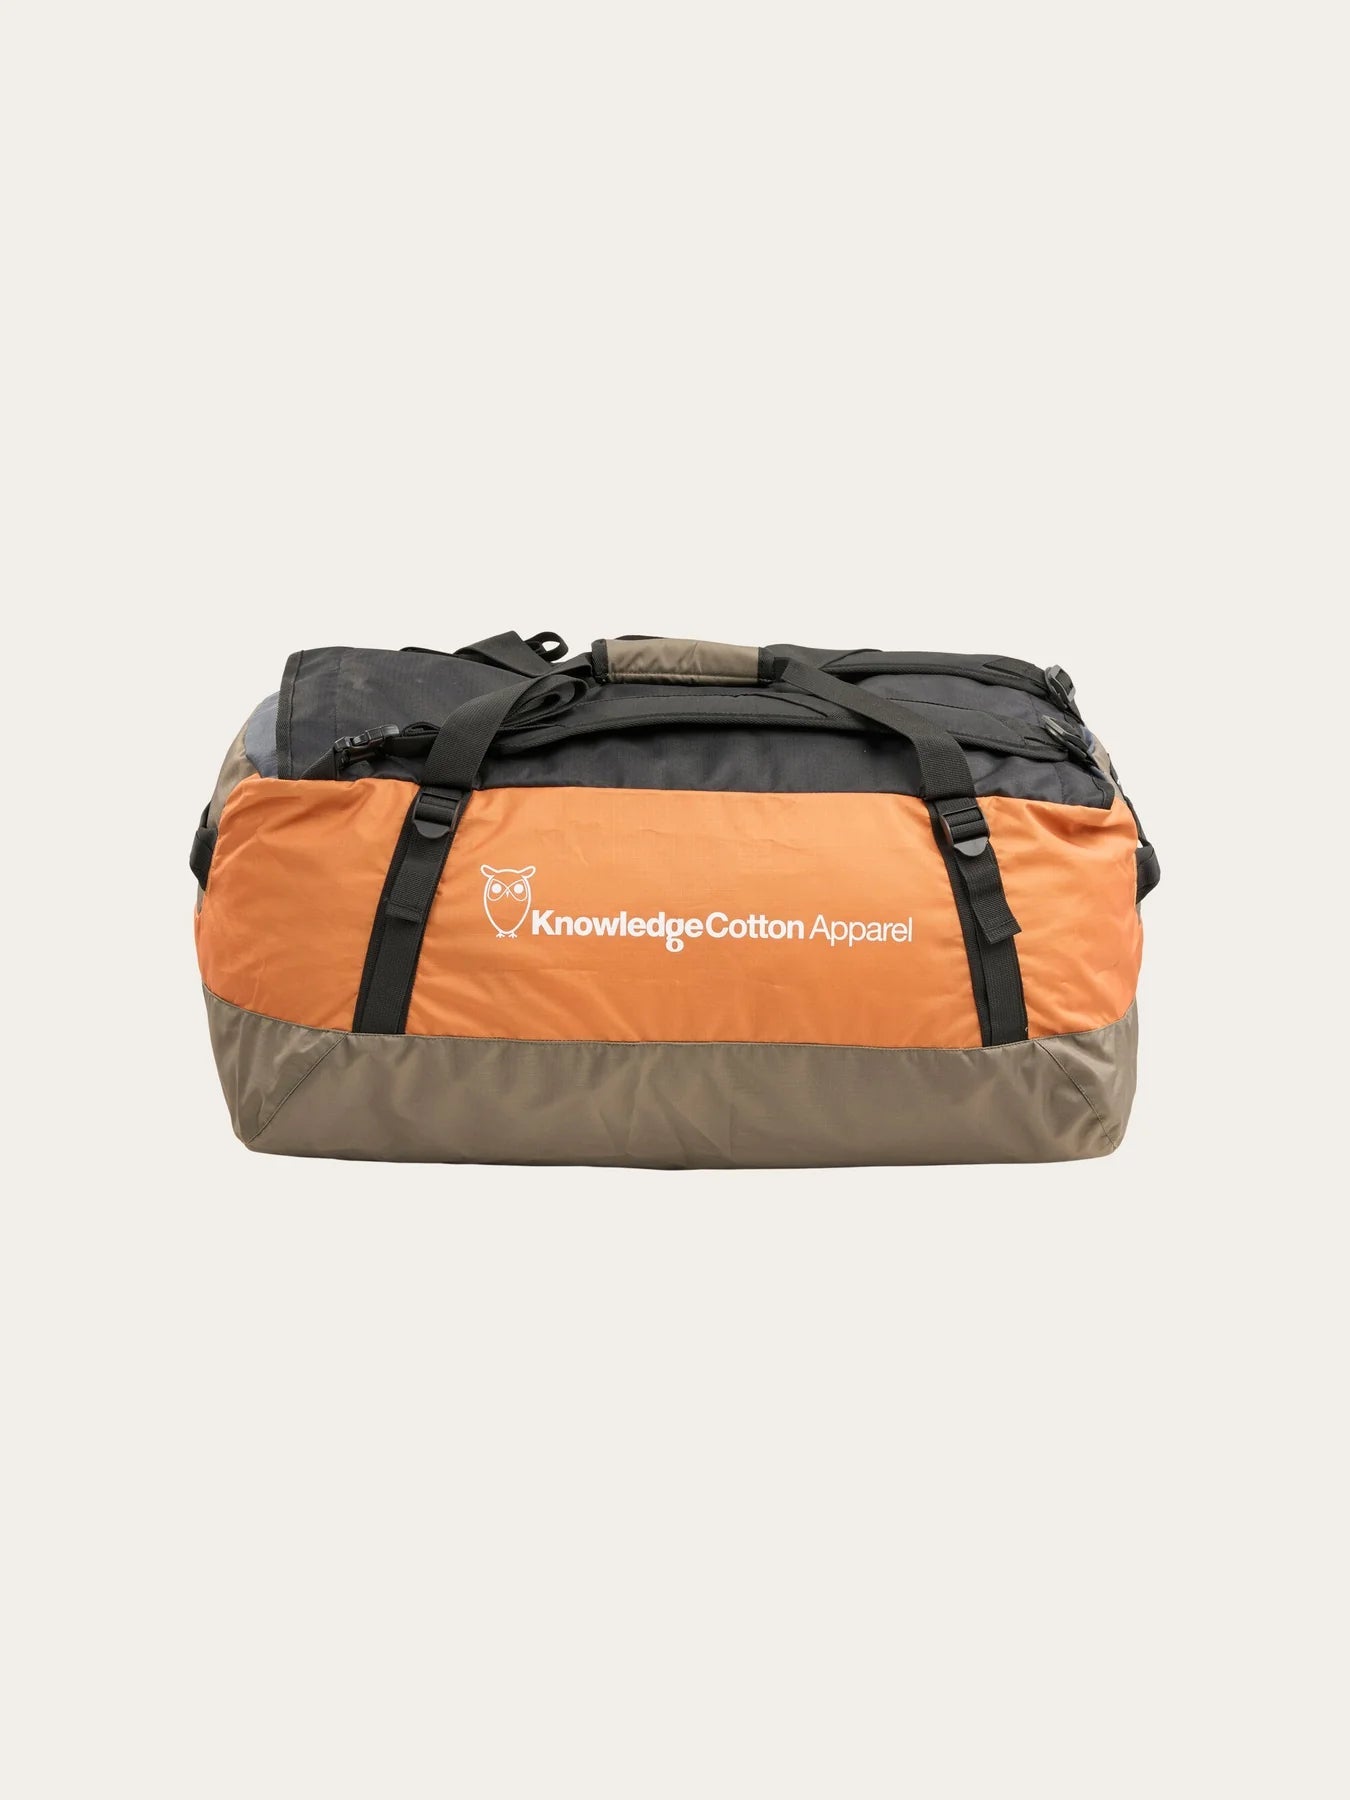 KnowledgeCotton Apparel - Packable Duffel Backpack 50L - Recycled PET - Weekendbee - sustainable sportswear